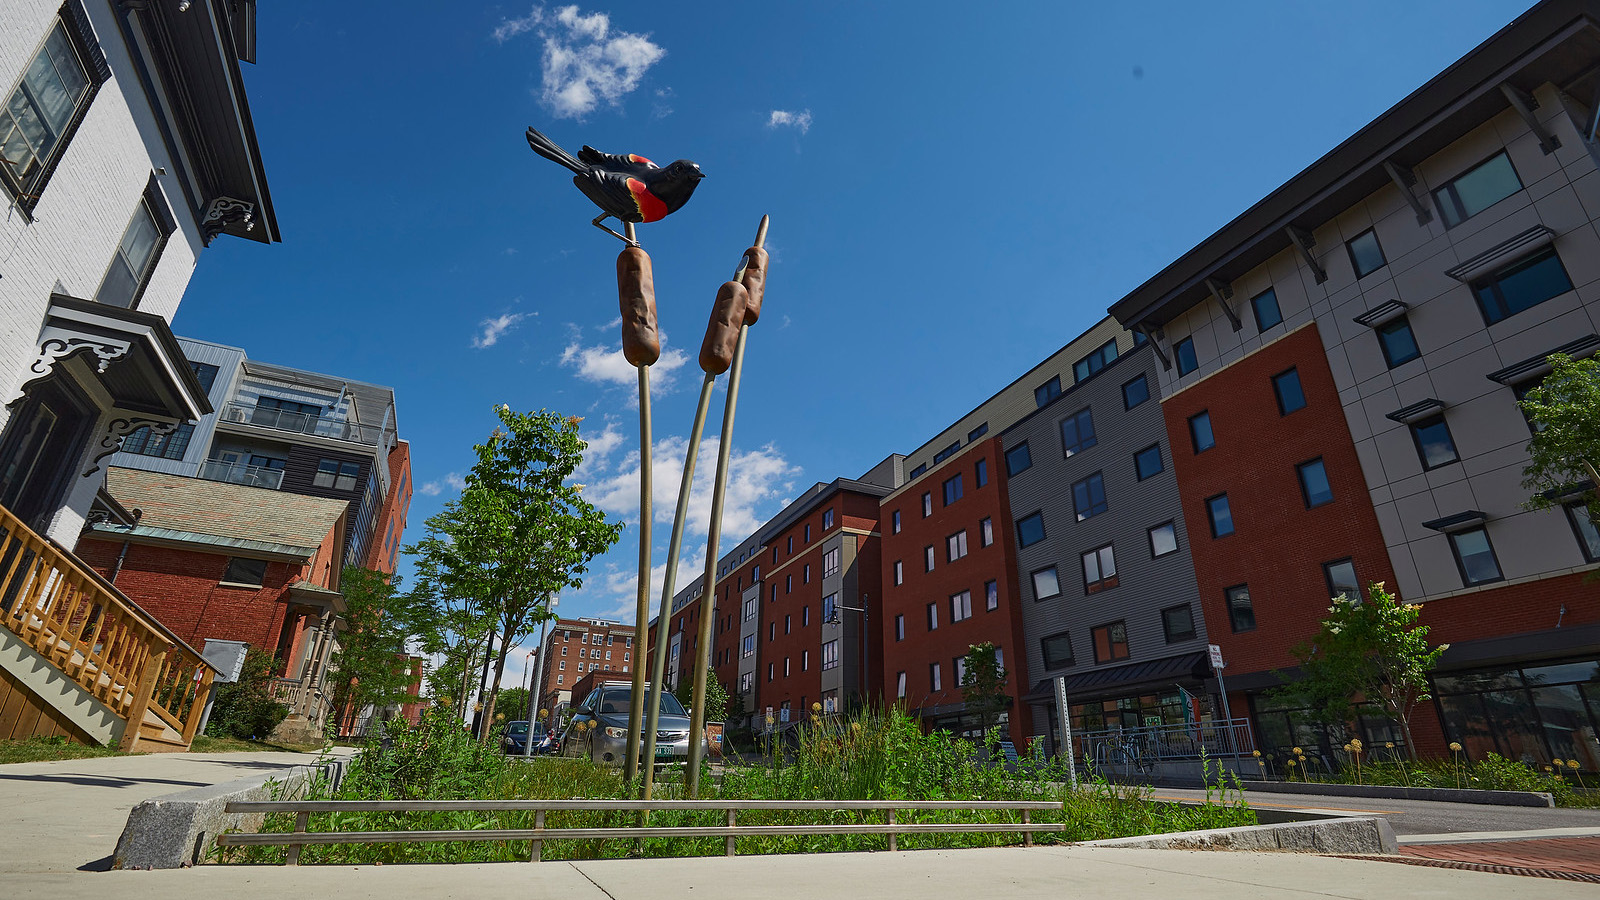 An outdoor sculpture of large cattails with a black bird with red and yellow patches on its wings balanced atop. The statue sits in a green grassy area on a Burlington city street with a blue sky above.  